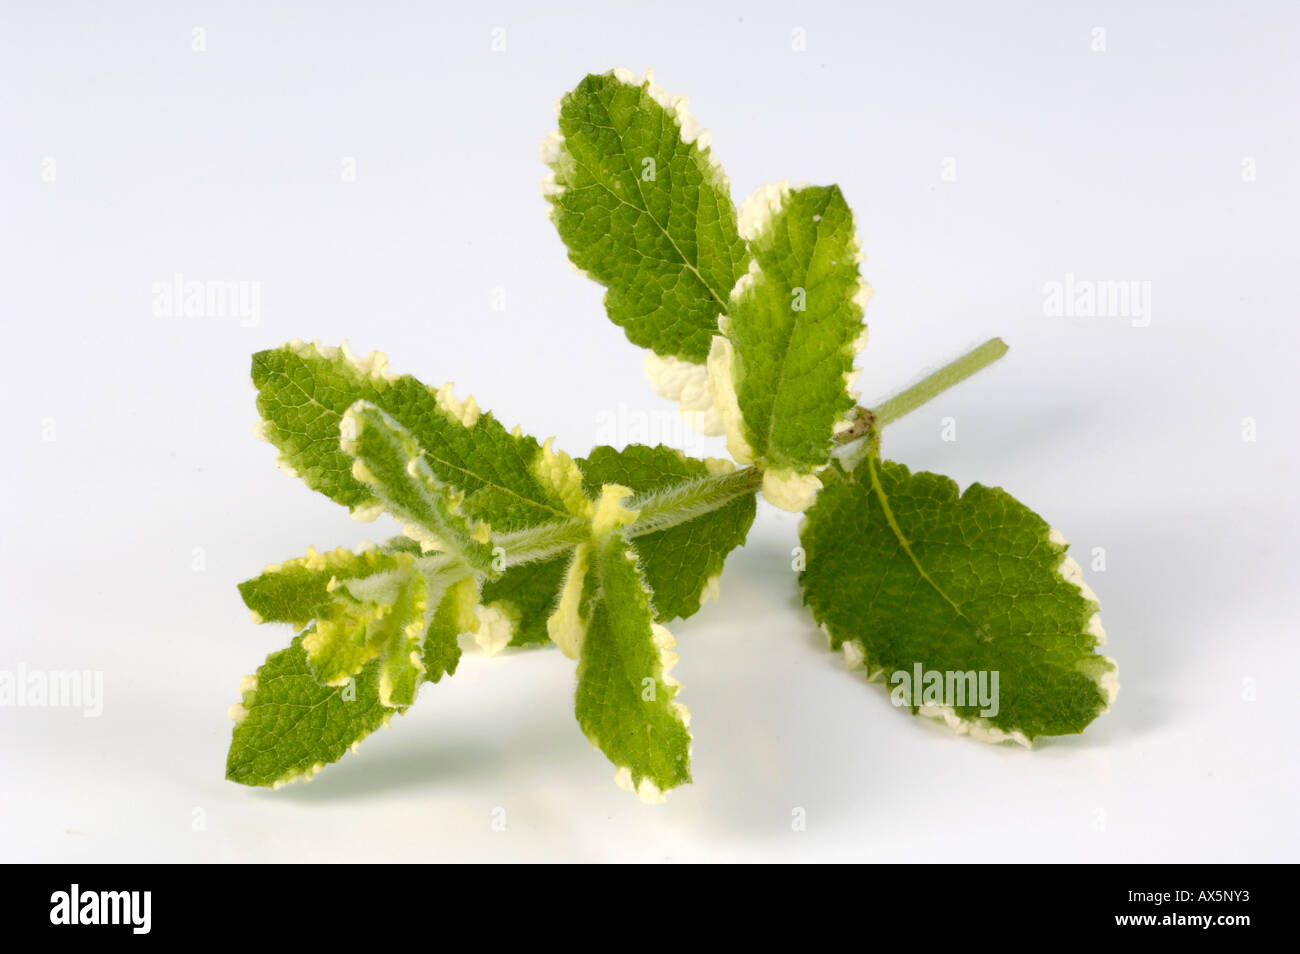 Apple Mint / Round-leaved Mint  Stock Photo